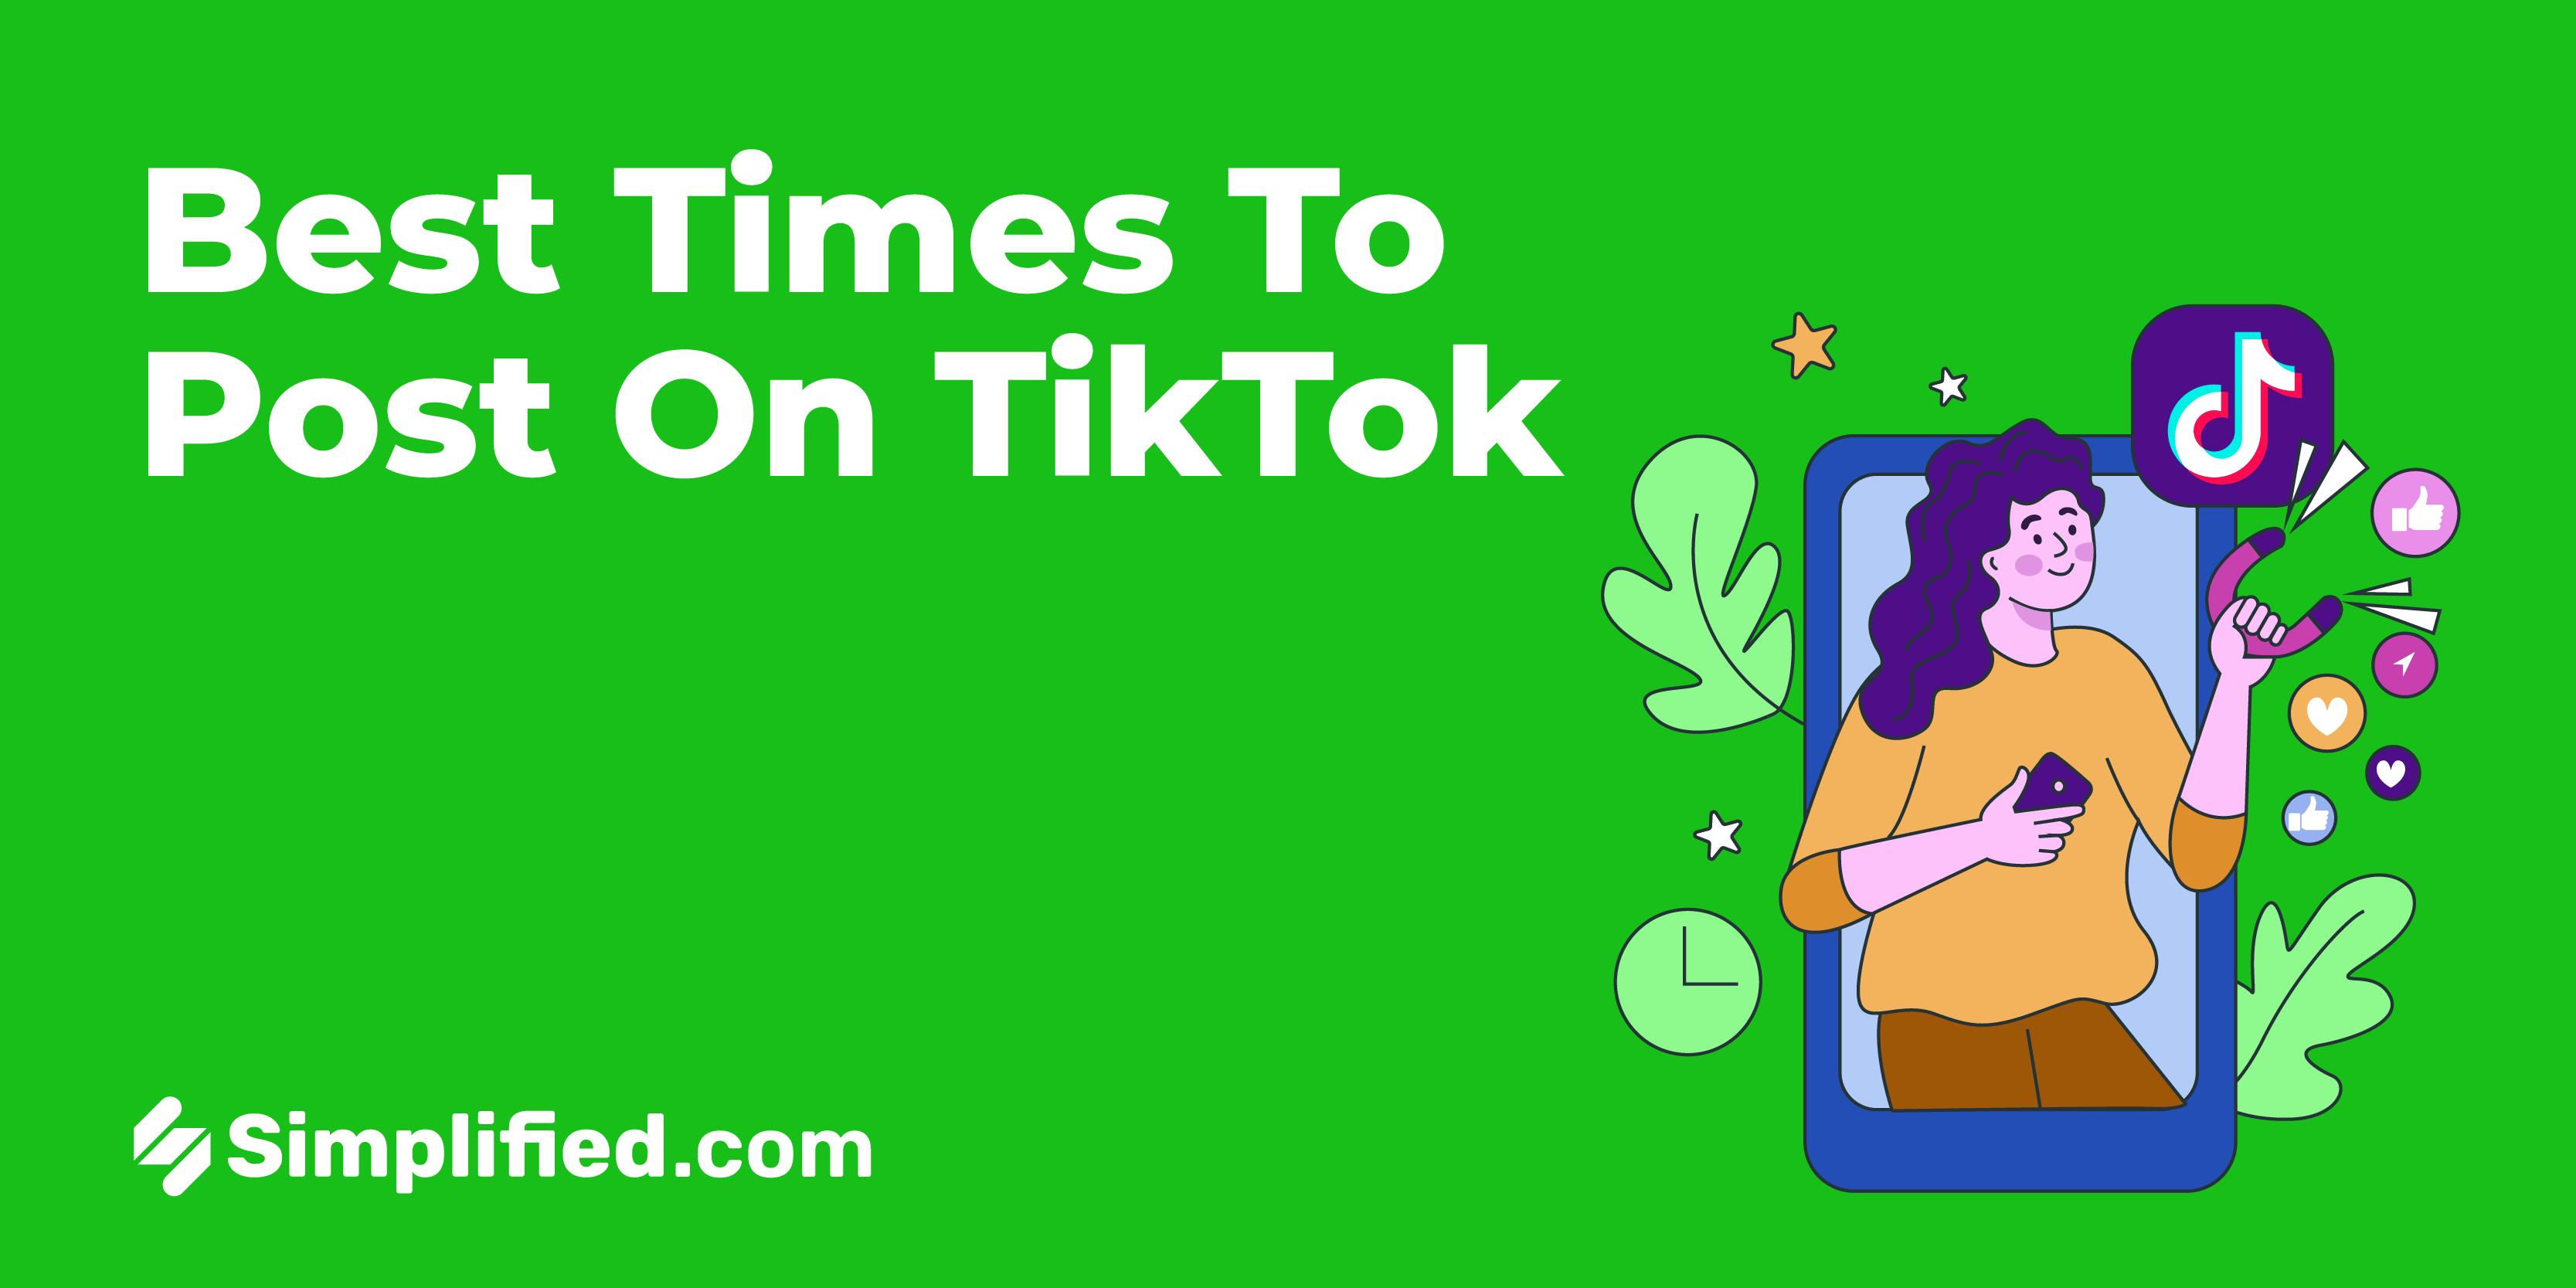 What is the Best Time to Post on TikTok in 2024?